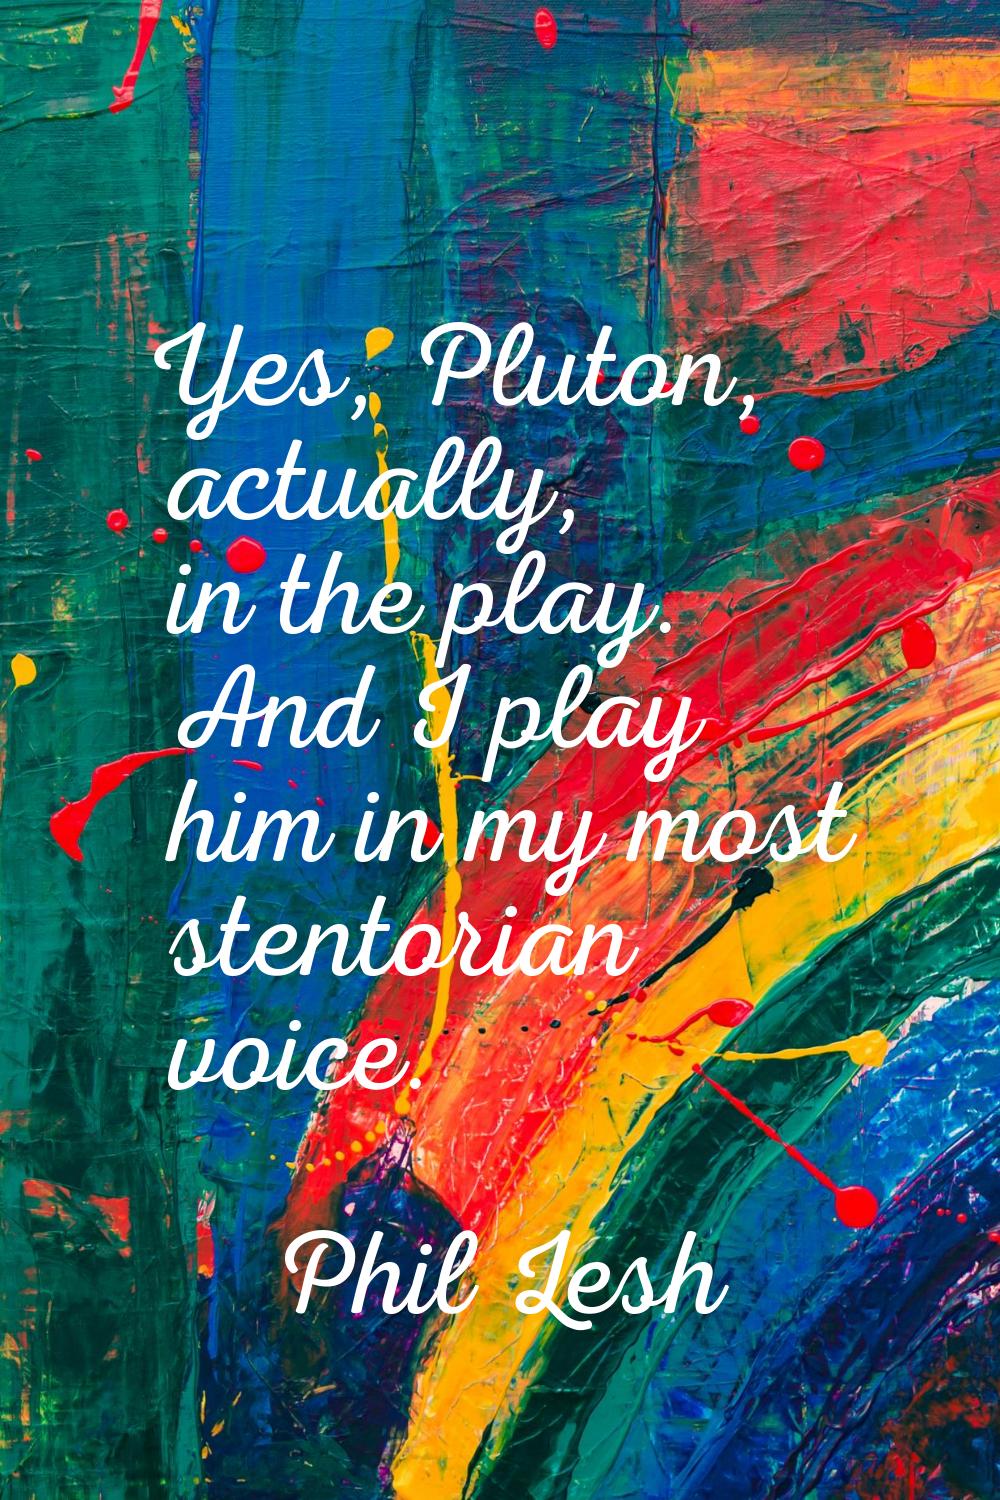 Yes, Pluton, actually, in the play. And I play him in my most stentorian voice.